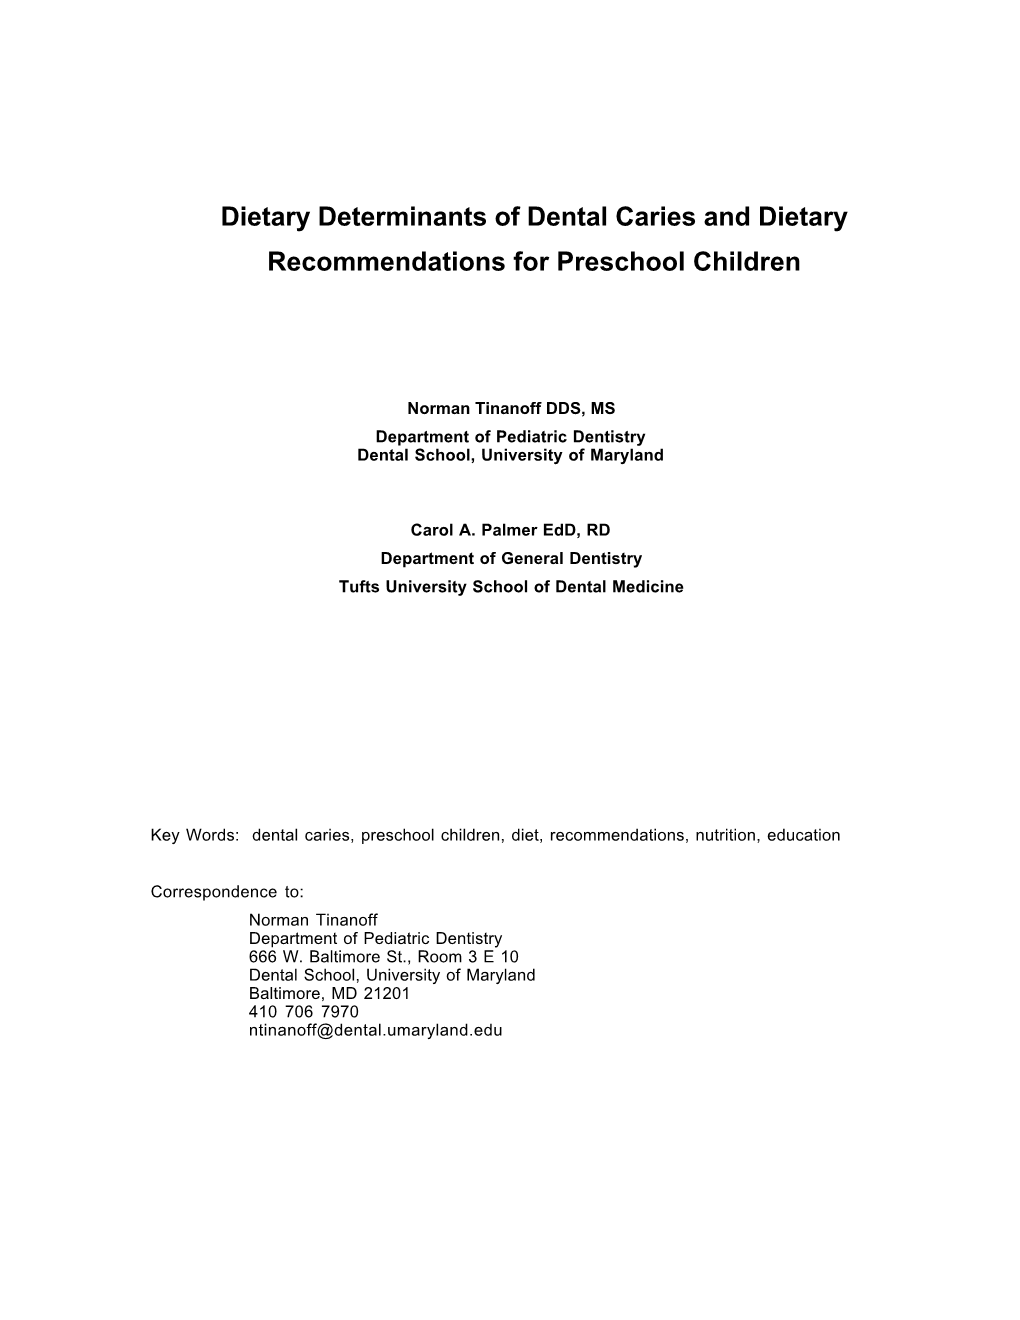 Dietary Determinants of Dental Caries and Dietary Recommendations for Preschool Children